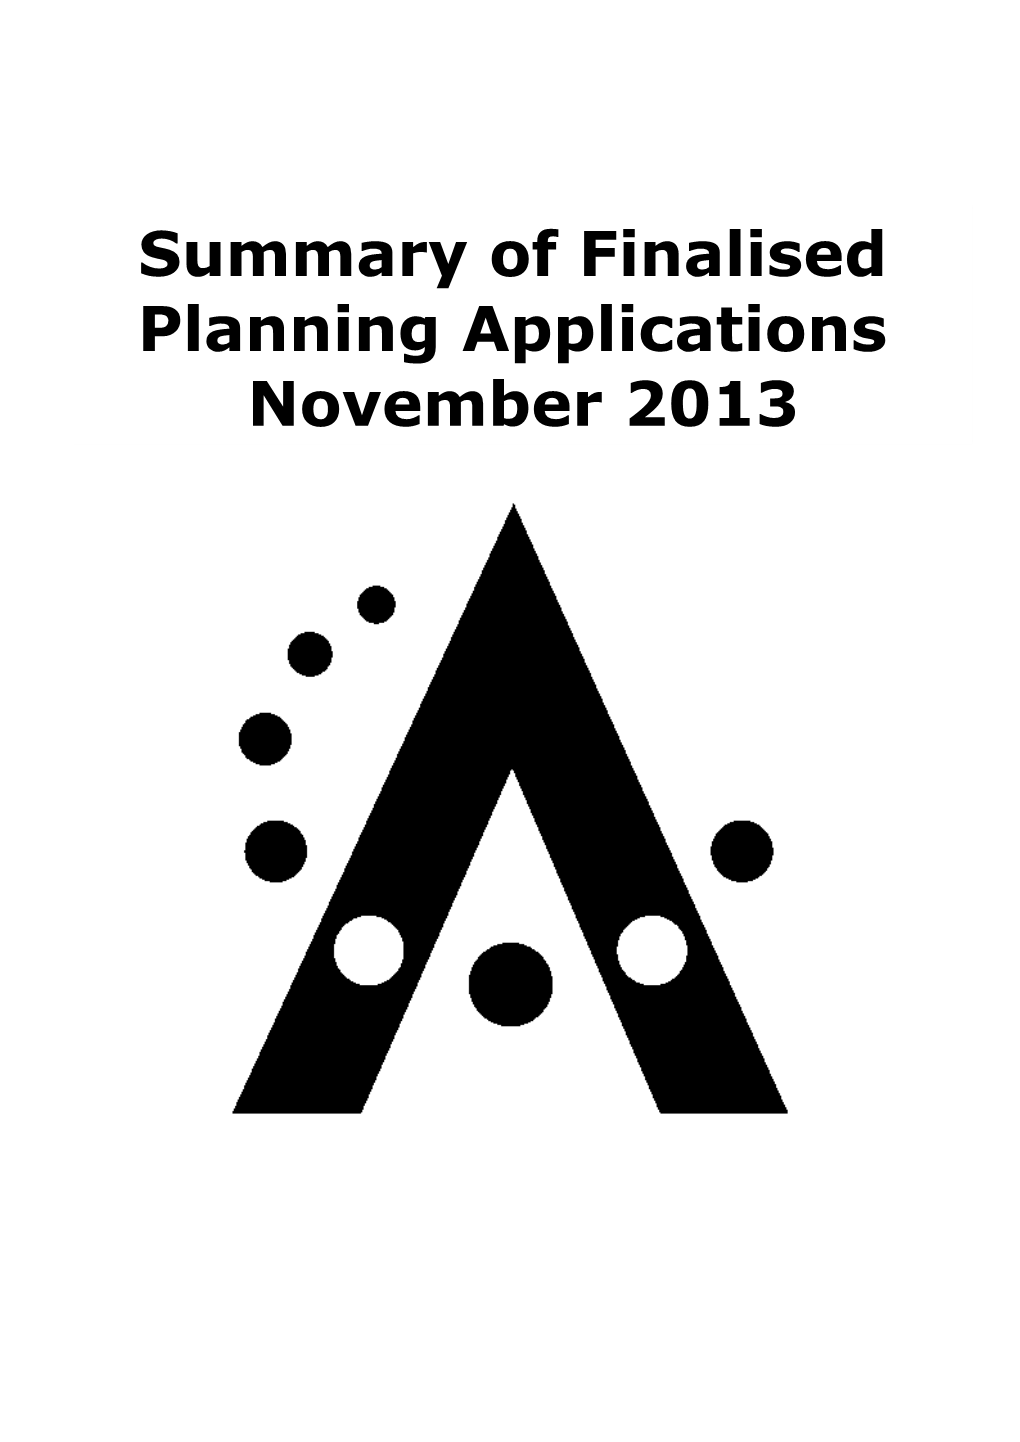 Summary of Finalised Planning Applications November 2013 Summary of Finalised Planning Applications November 2013